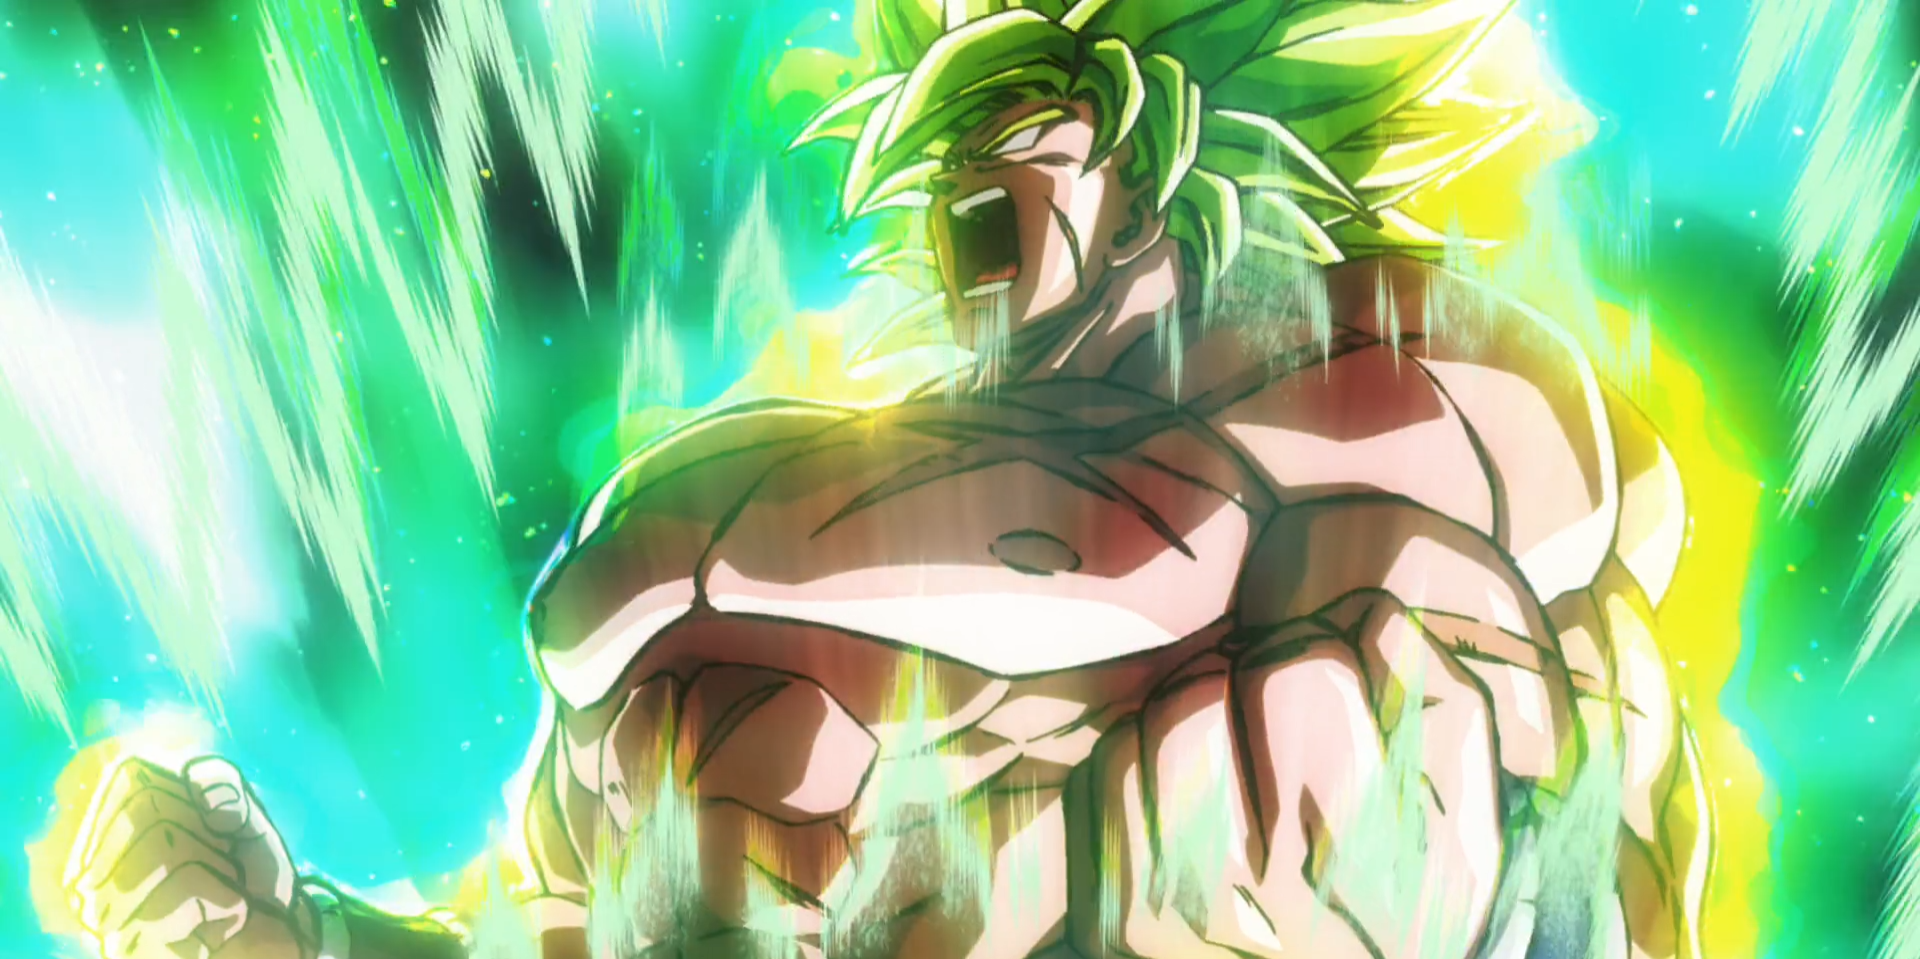 An image of Broly screaming while in Legendary Super Saiyan from